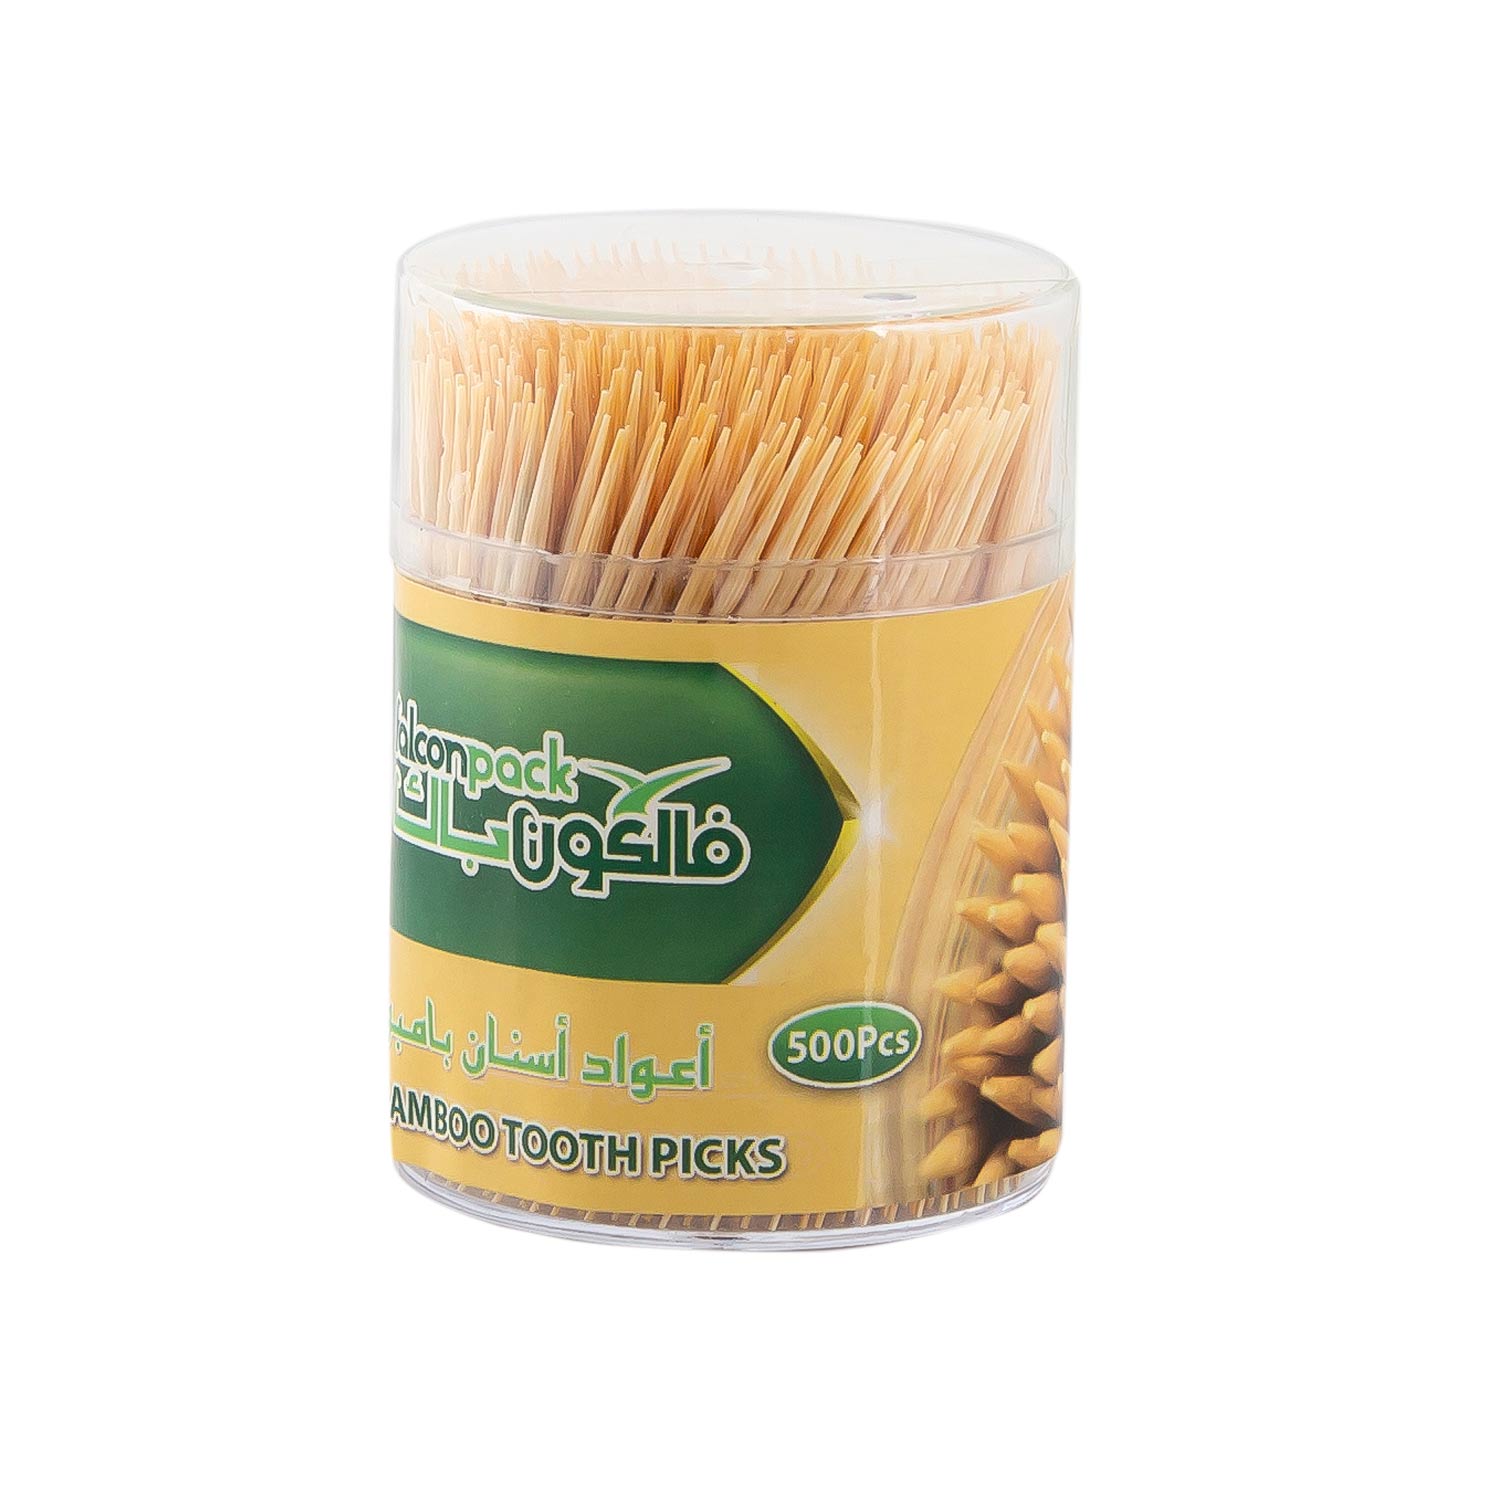 Bamboo Toothpick's